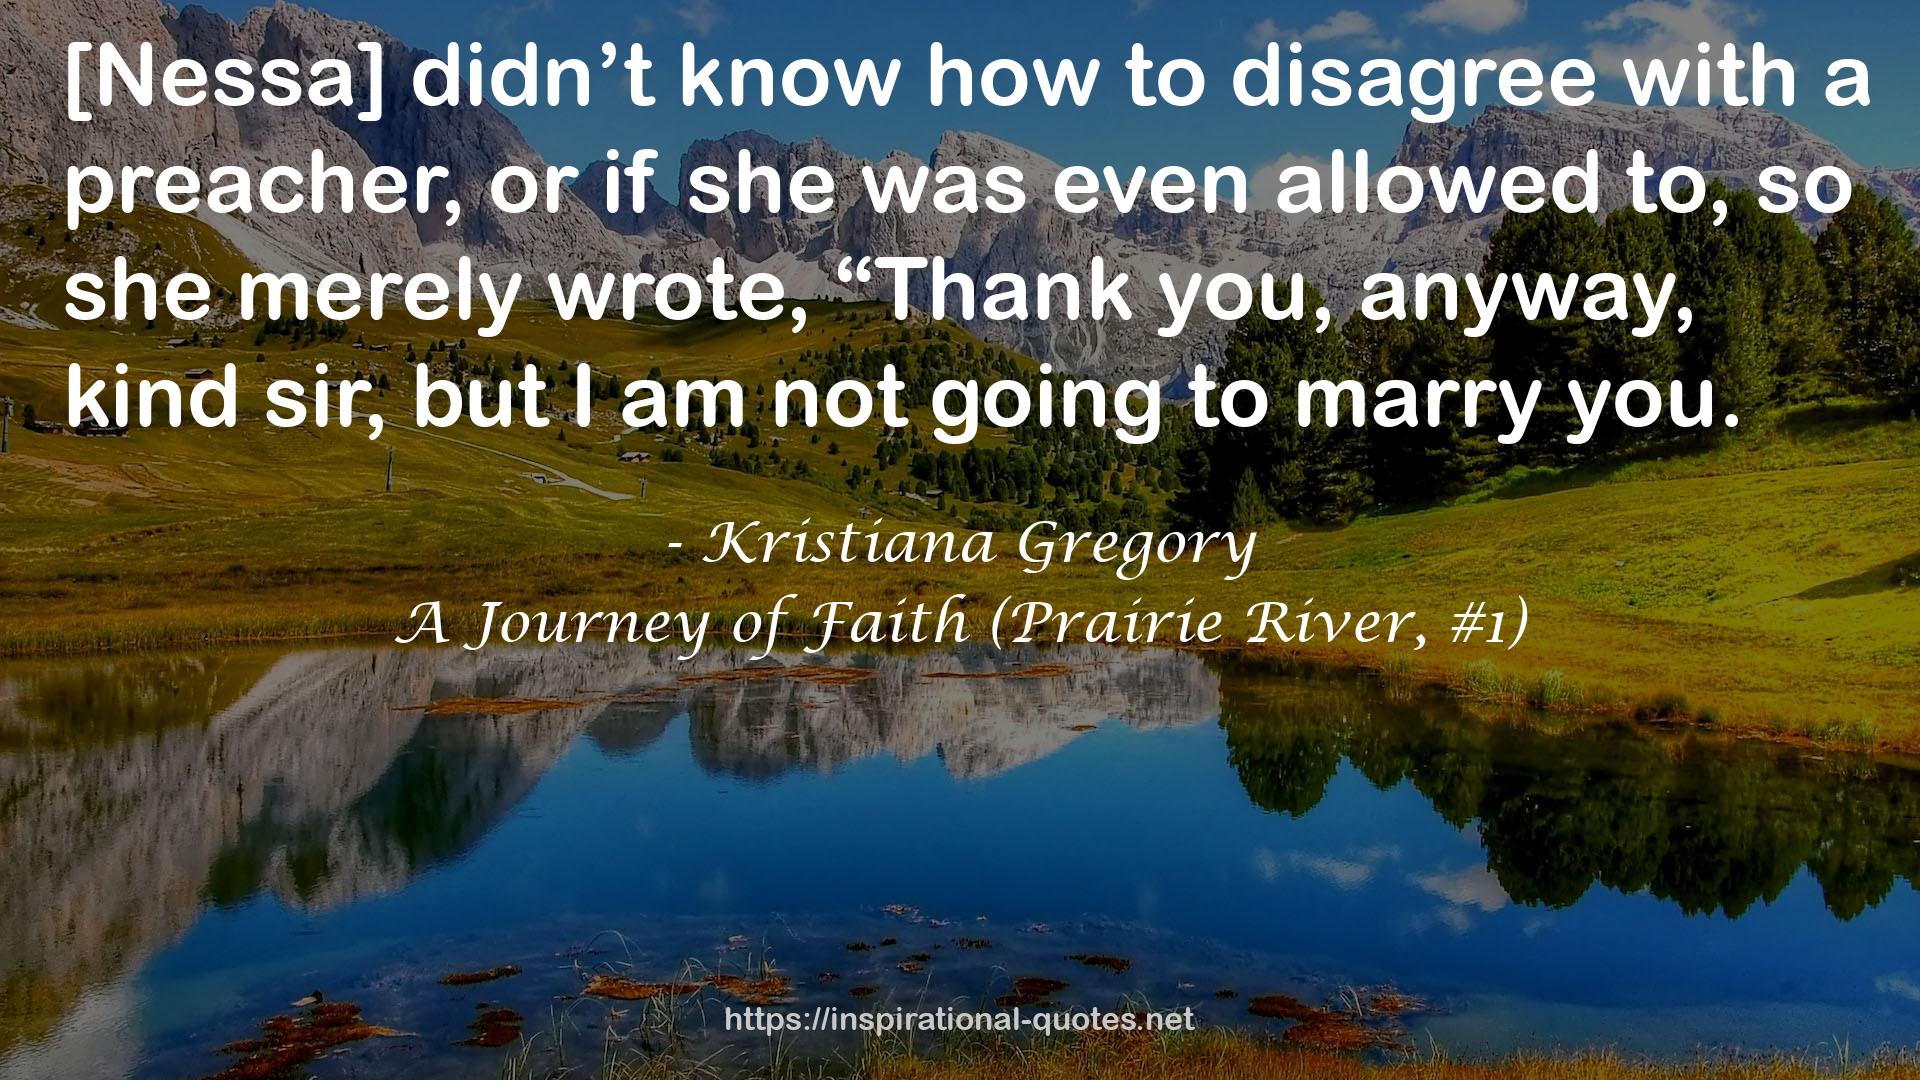 Kristiana Gregory QUOTES